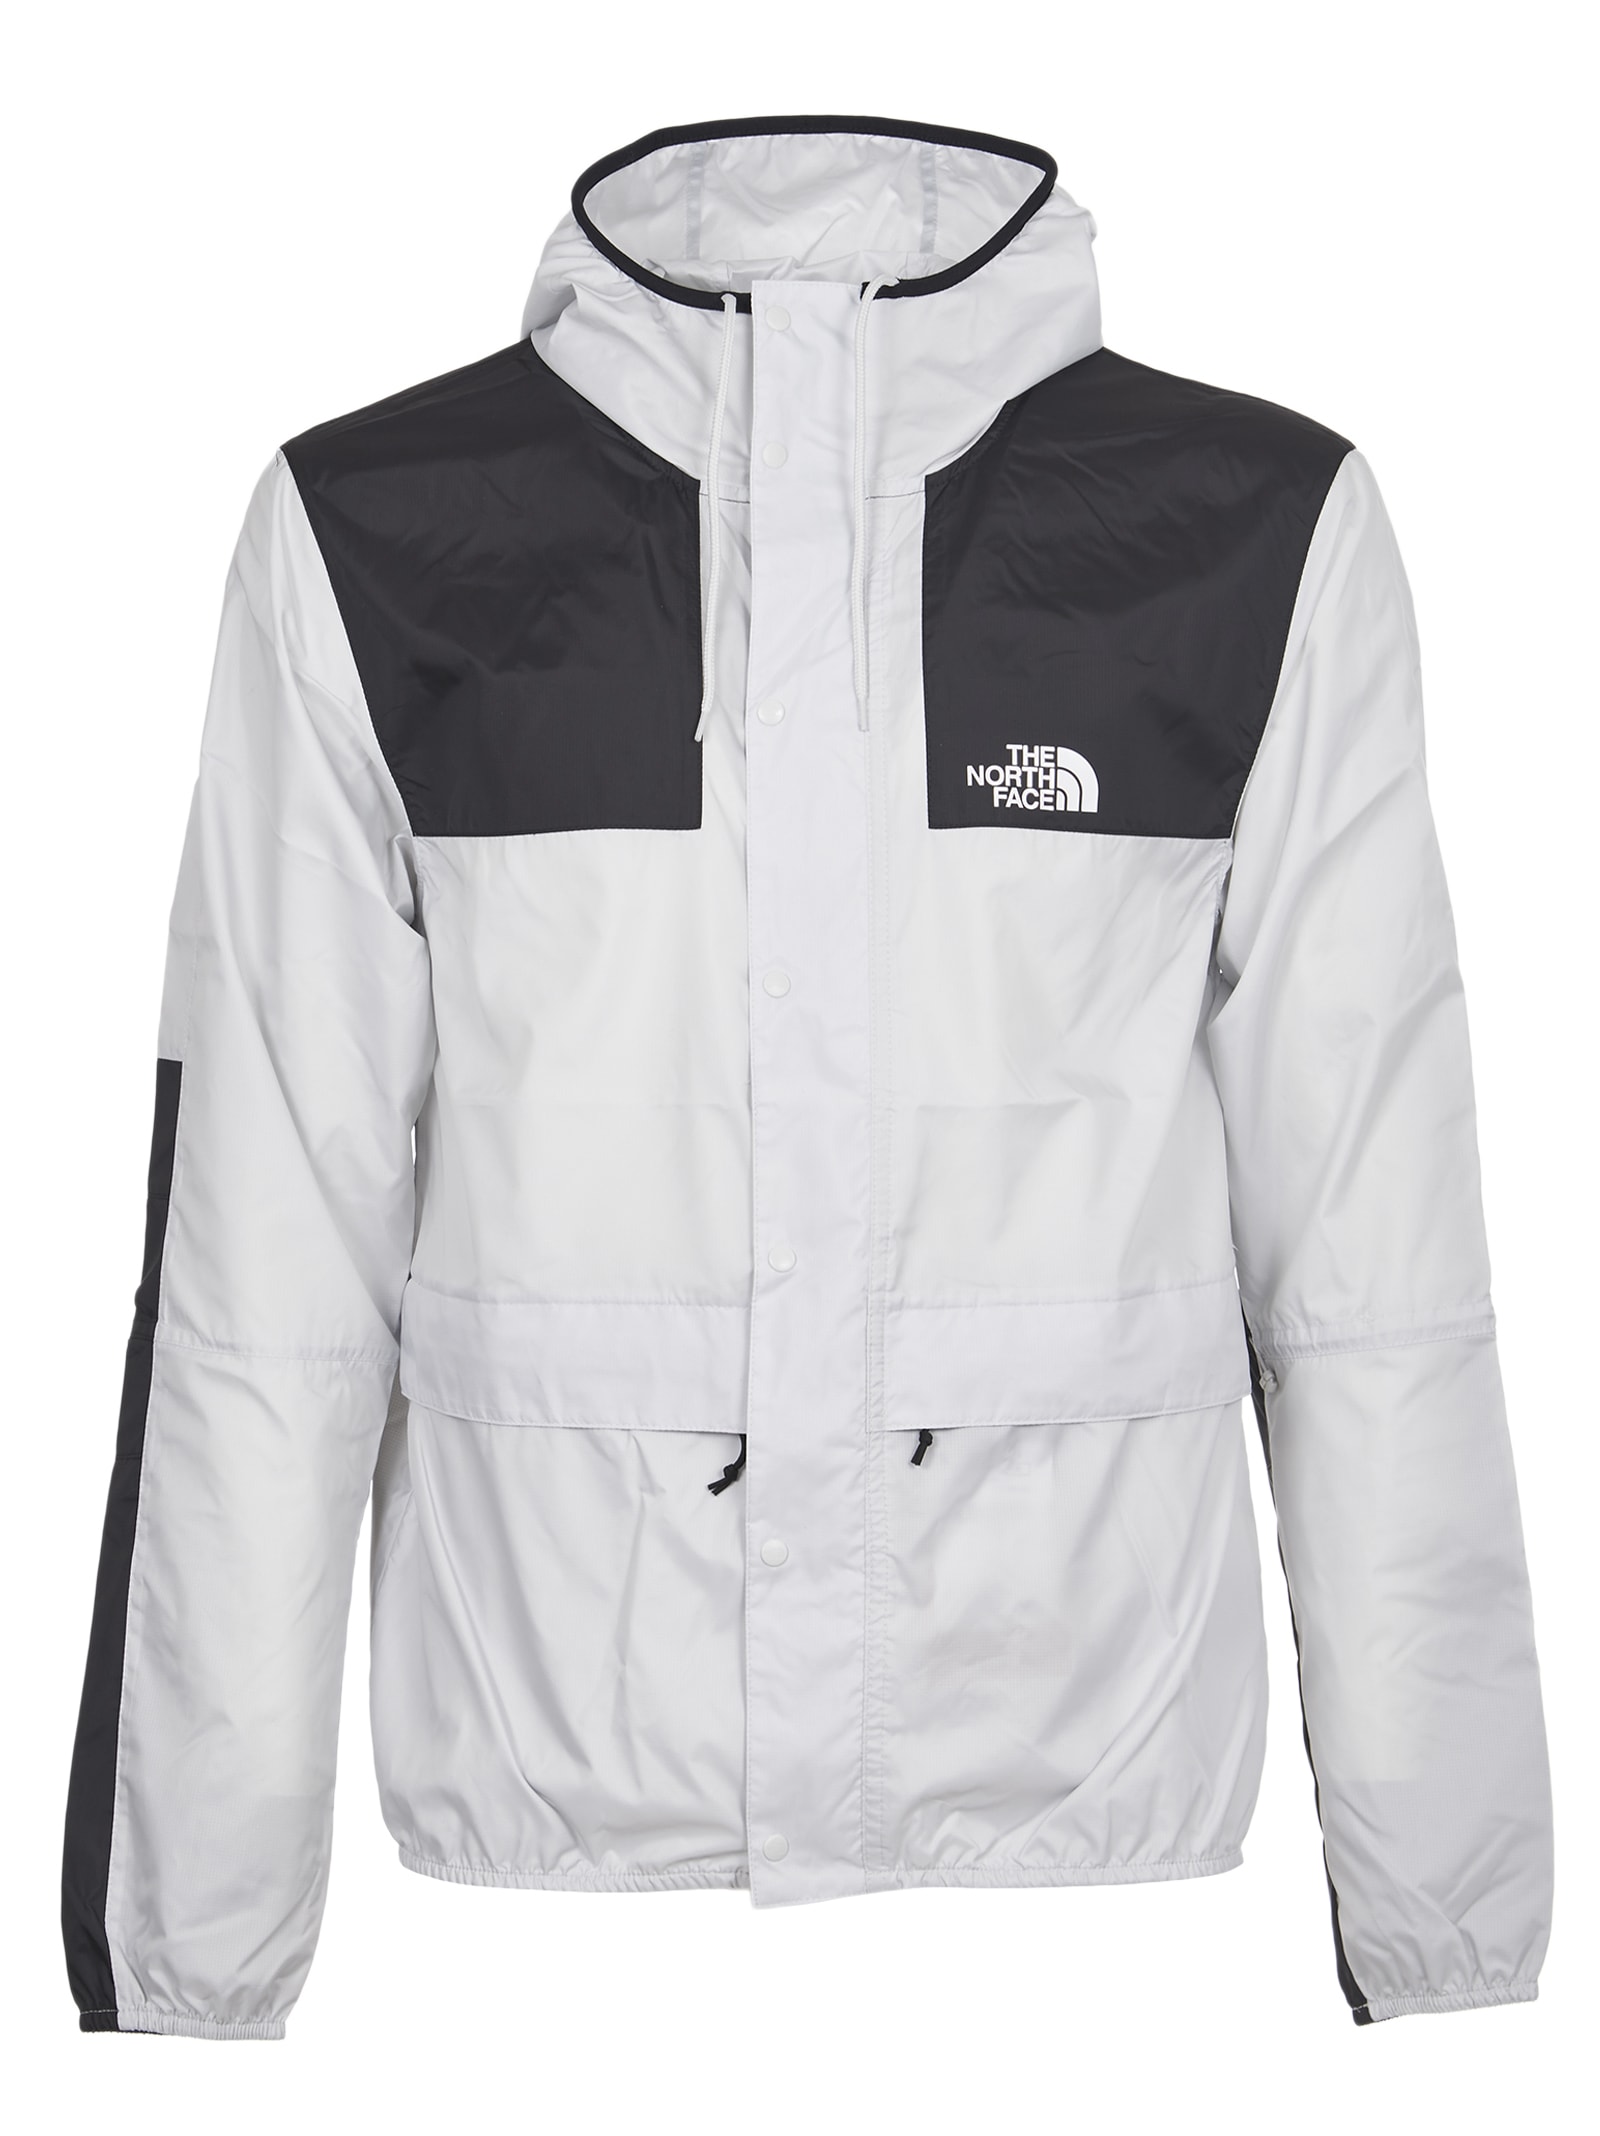 The North Face Black And White Mountain 1935 Windbreaker Jacket